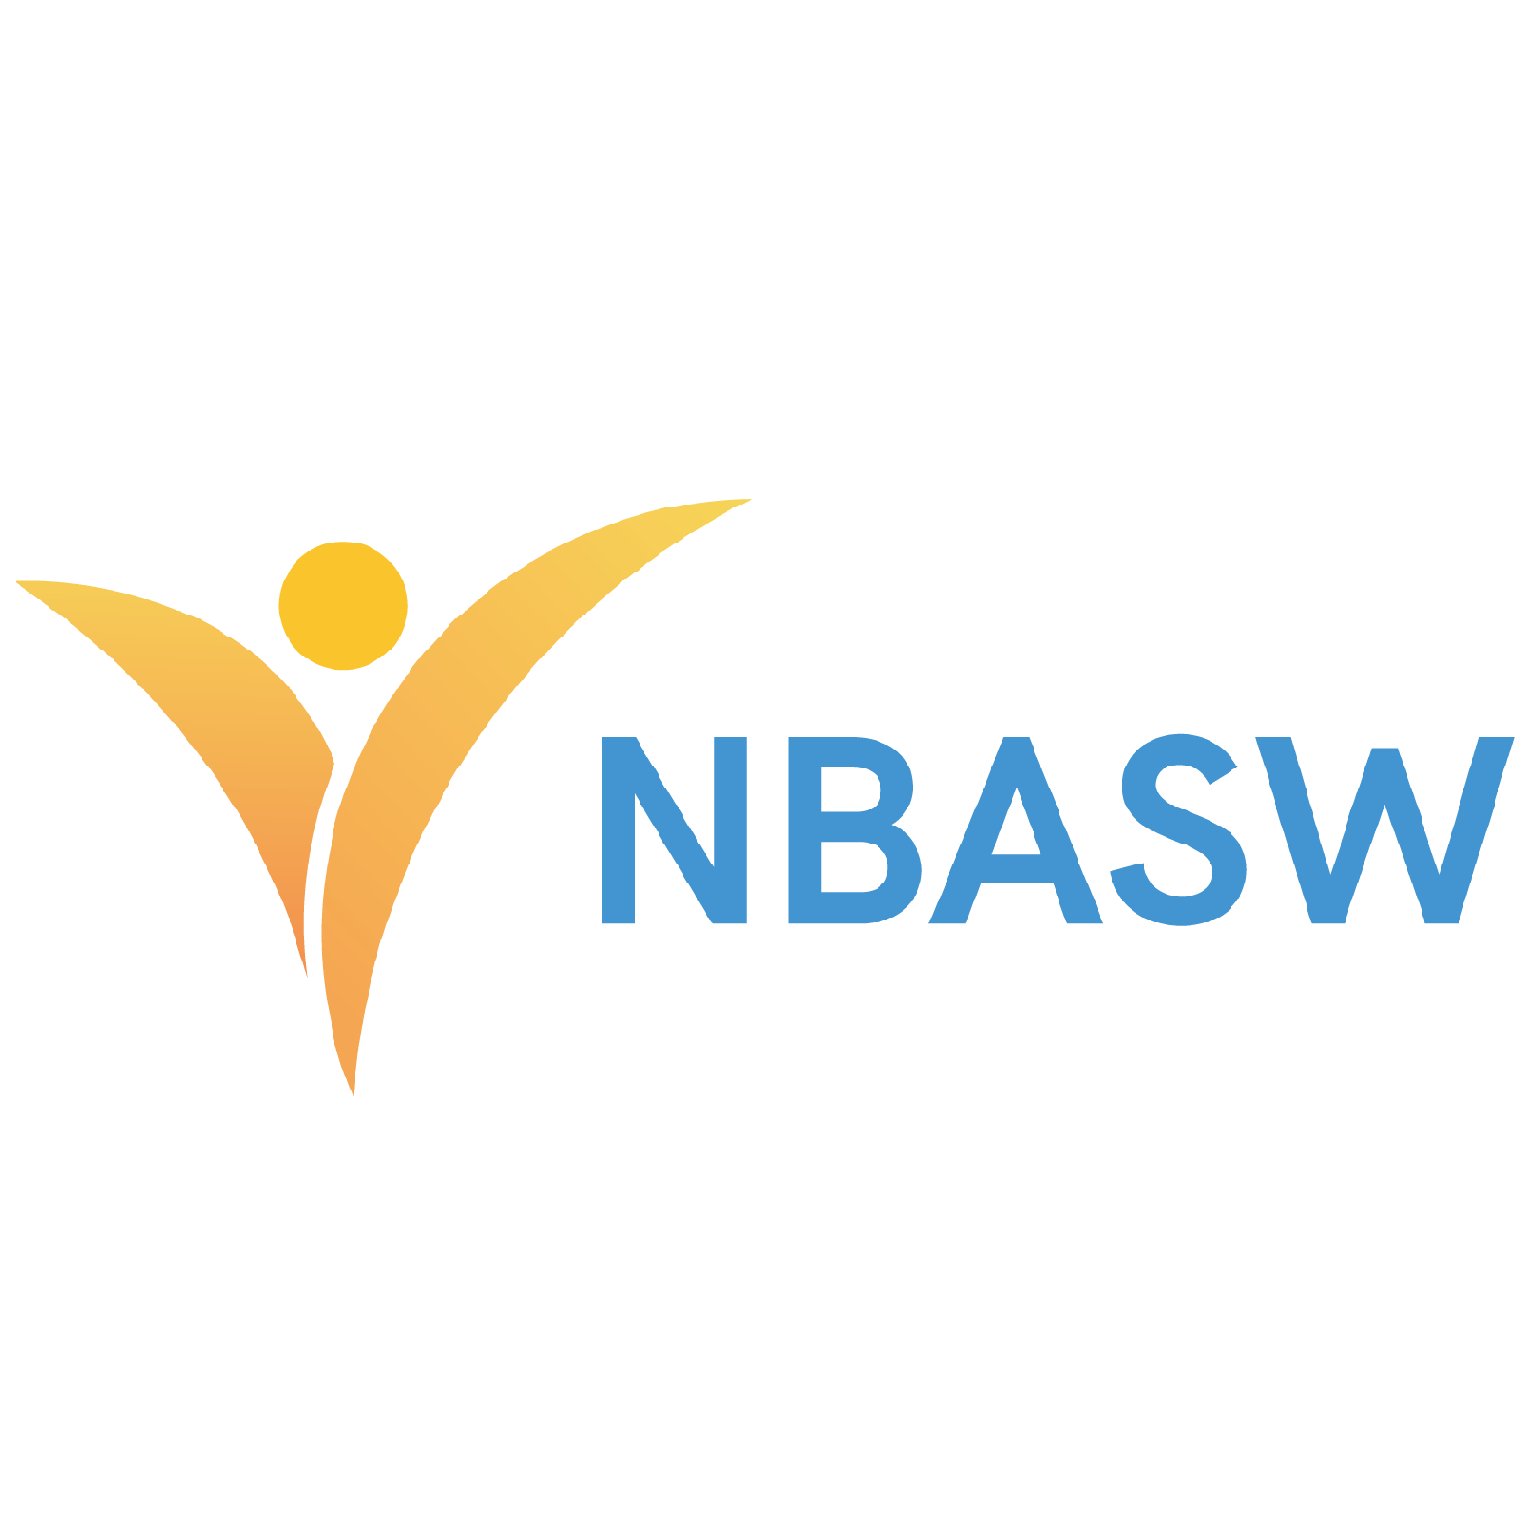 The NBASW envisions a professional organization that reflects the values of social work, provides ethical leadership and instills public confidence. @TravSocNB